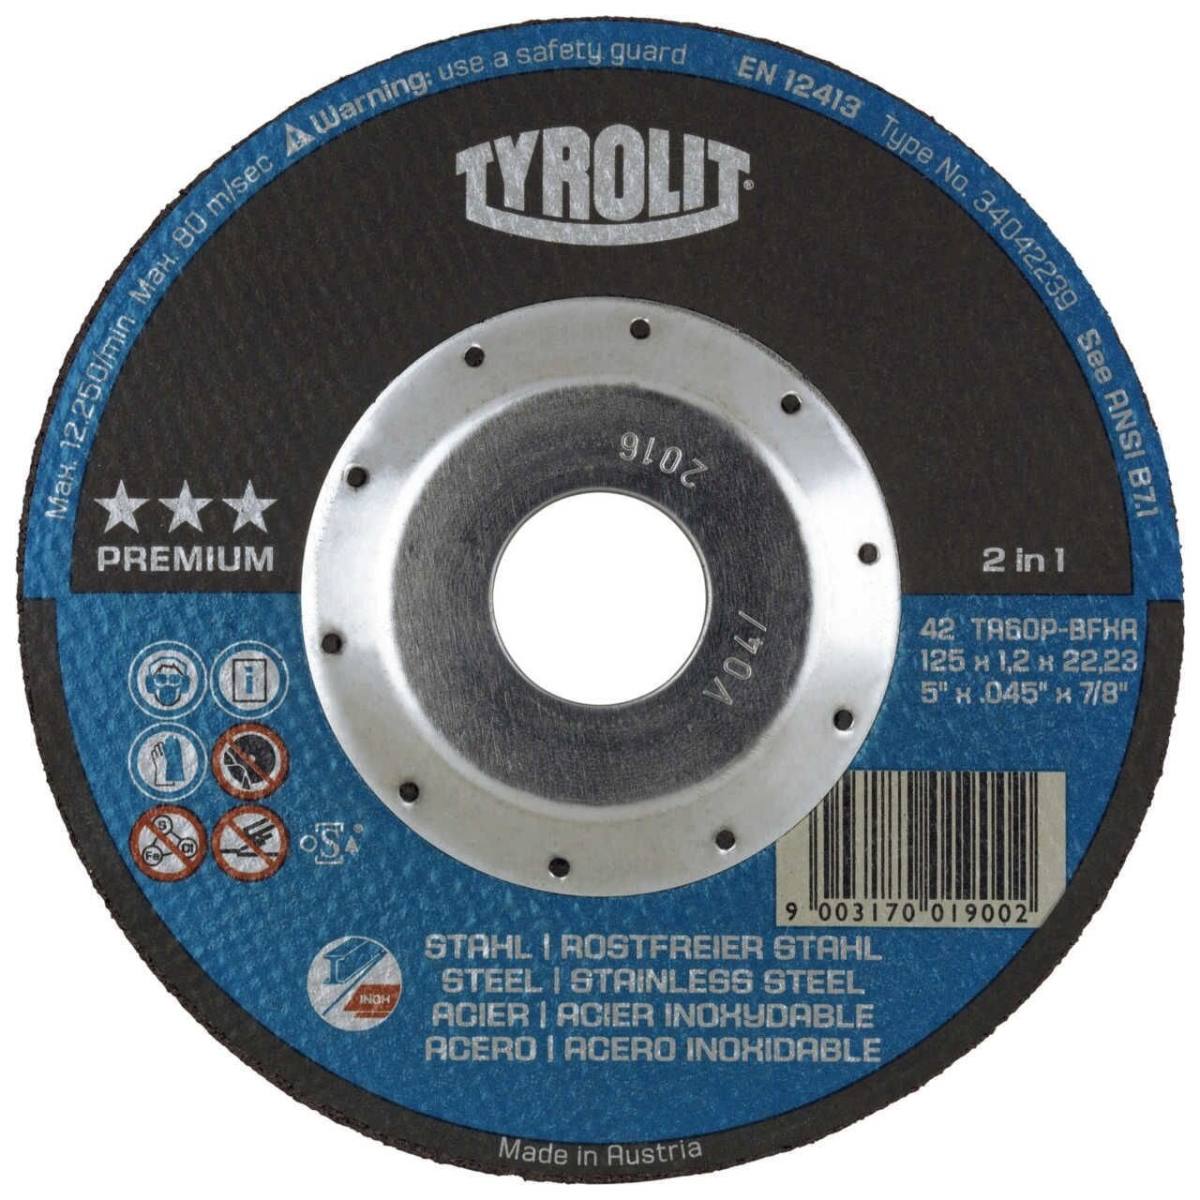 TYROLIT cut-off wheels DxUxH 150x1.2x22.23 With DEEP Cut Protection for steel and stainless steel, shape: 42 - offset version, Art. 34042240